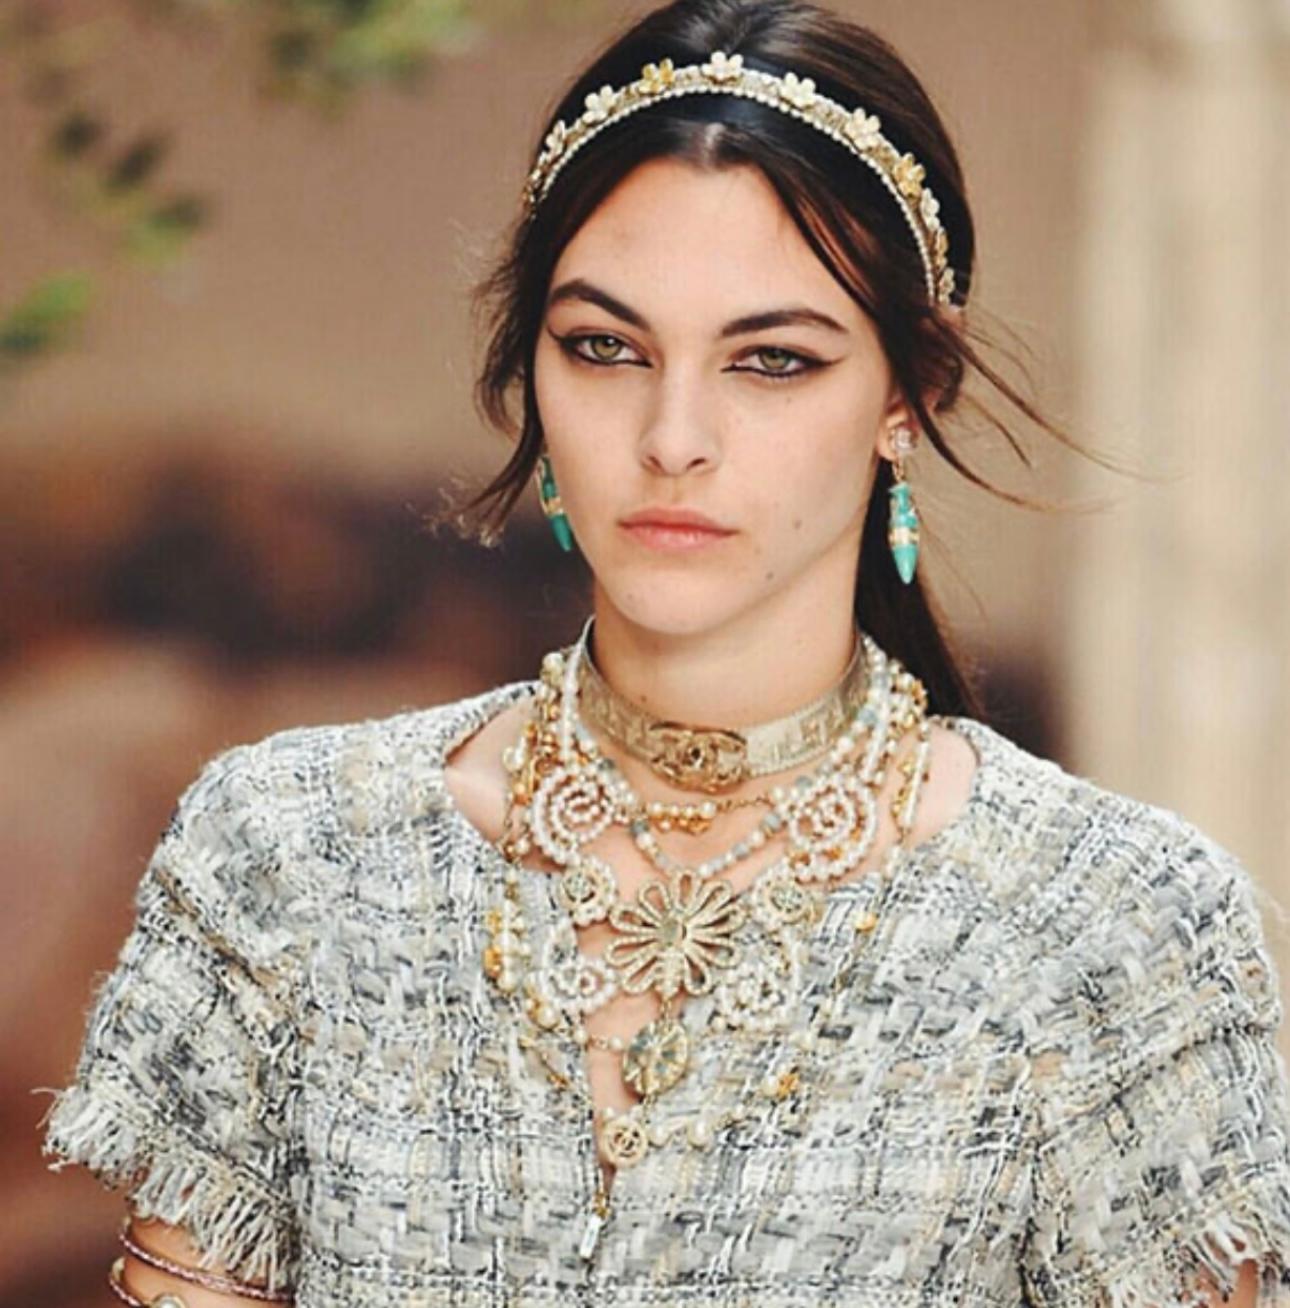 Chanel resort 2018 Paris Athènes collection ancient Greek urne vase amphora turquoise drop pierced earrings runway piece rare, some wear on the metal, stamped 